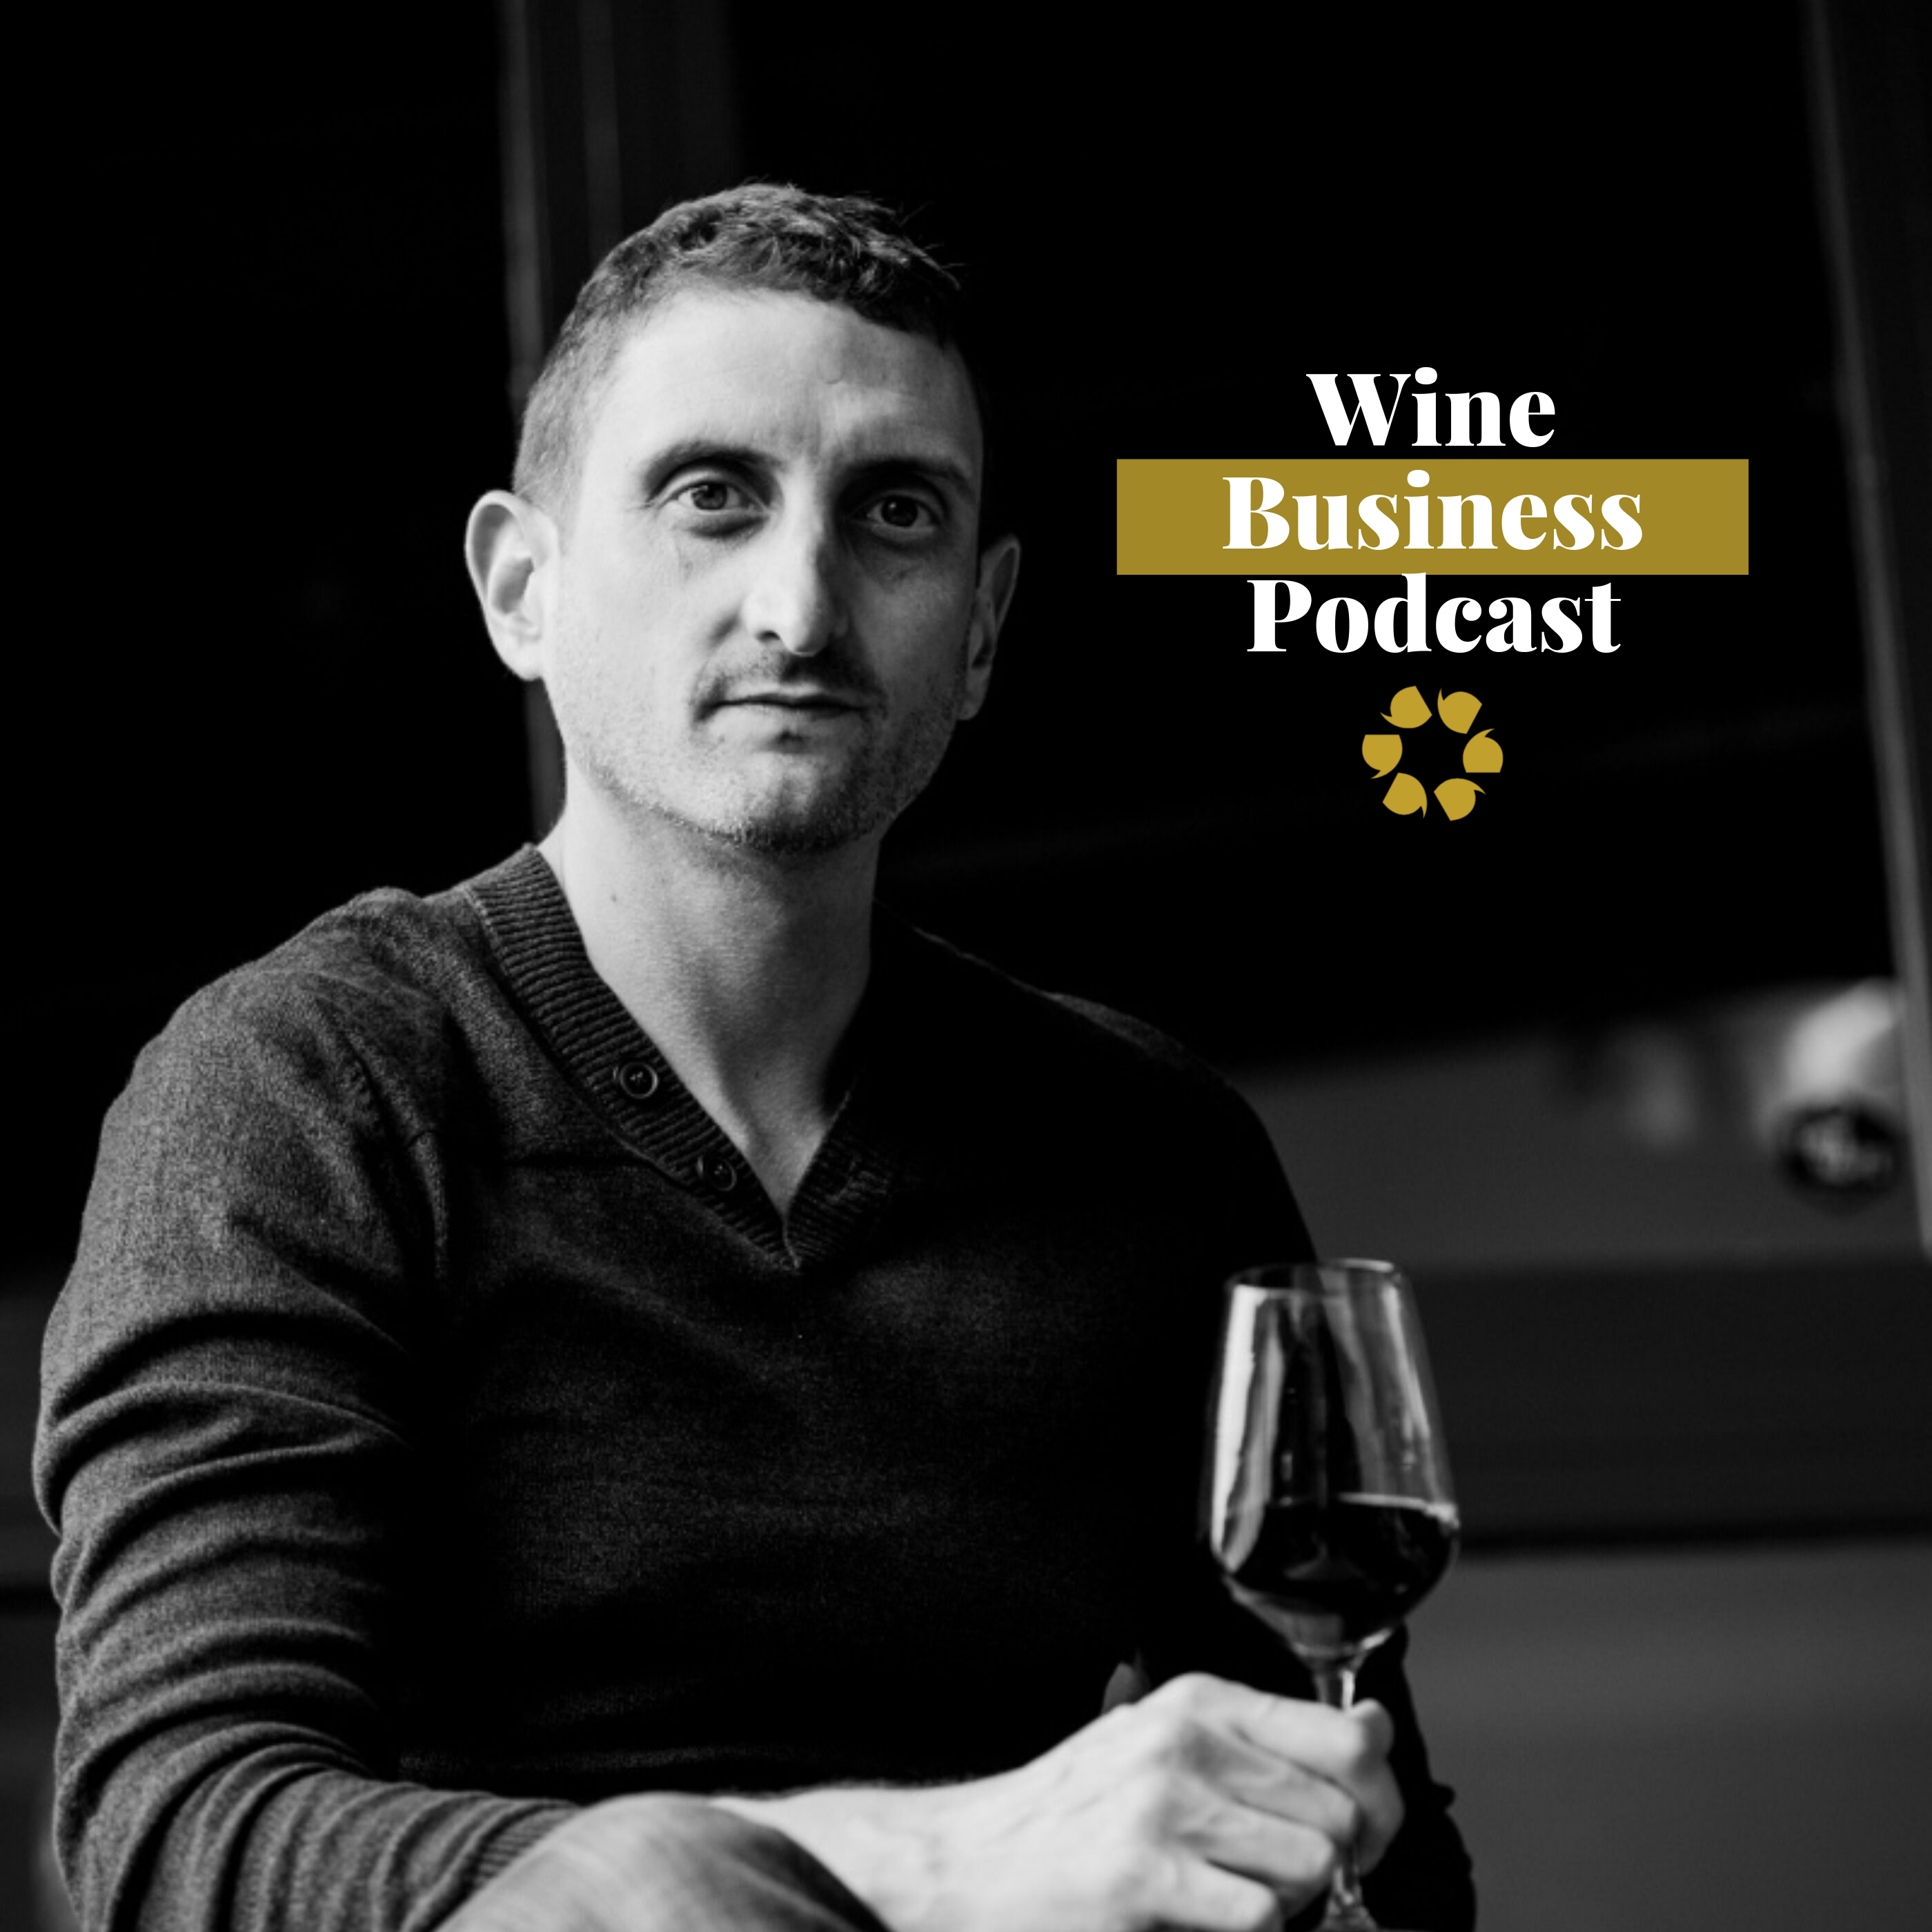 Wine Business Podcast Guest